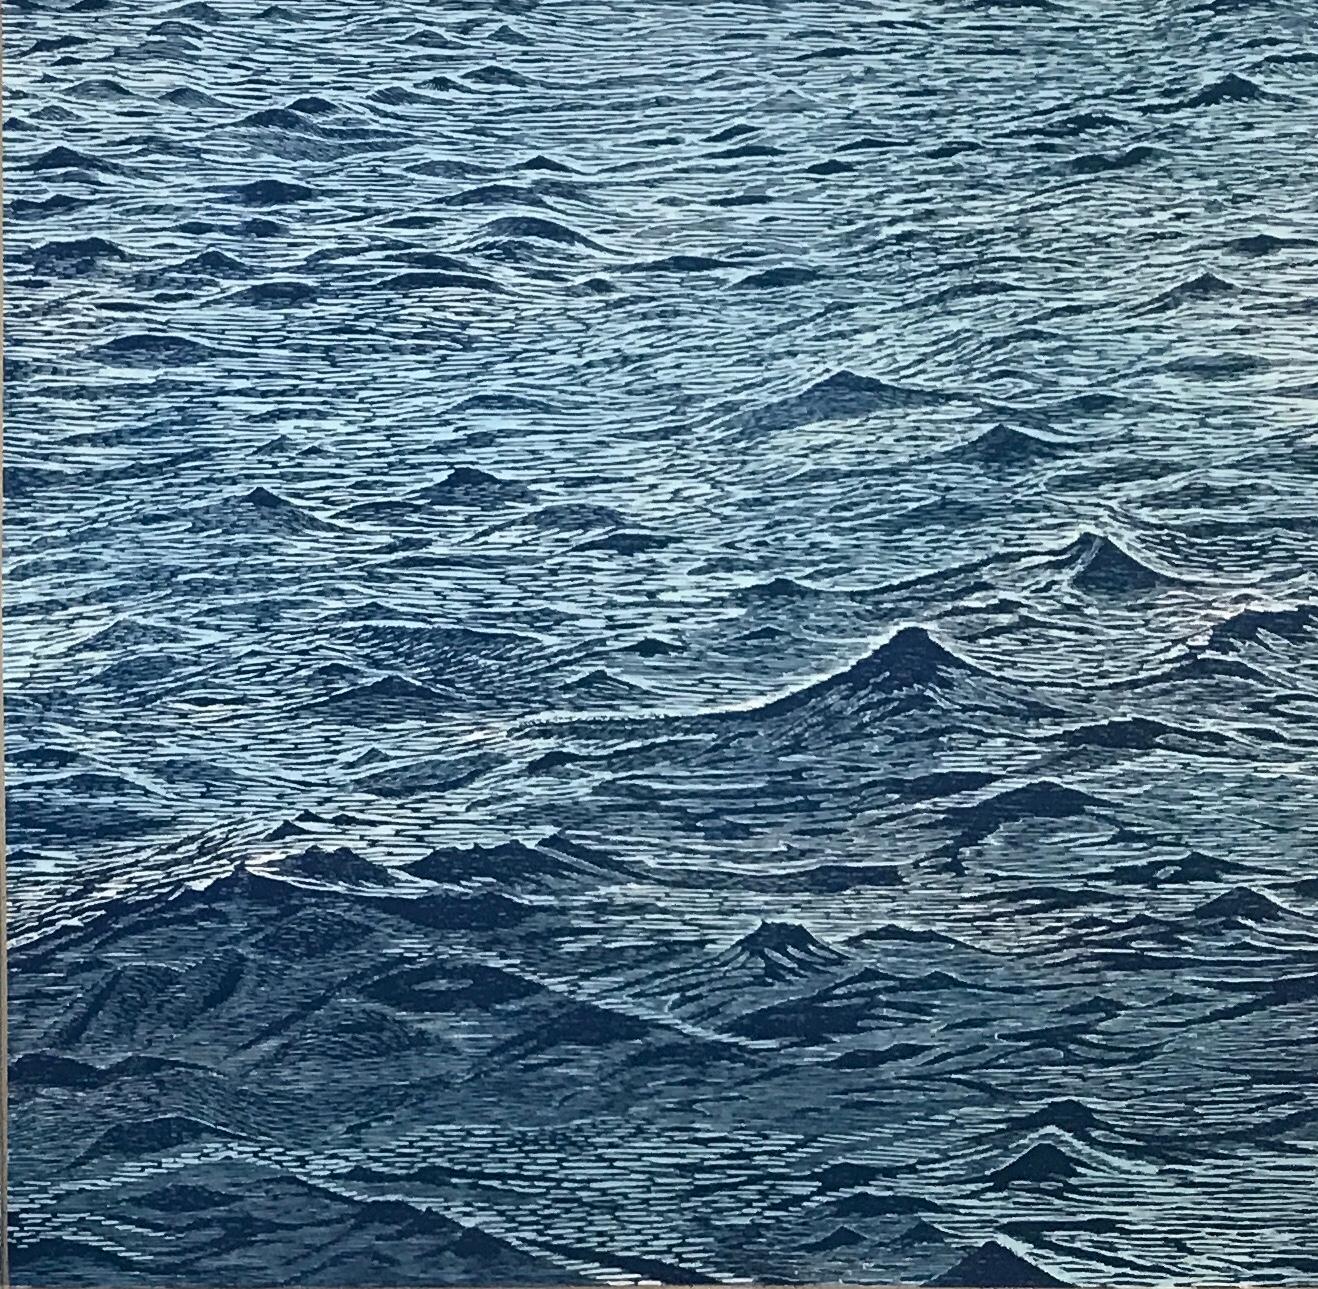 This is a unique woodcut print of ocean waves in shades of of blue from bright, pale blue to deep, dark cobalt. The monotype brings to mind the tradition of Japanese printing while being distinctly contemporary. 

Edition 1/1 (monotype) unframed.